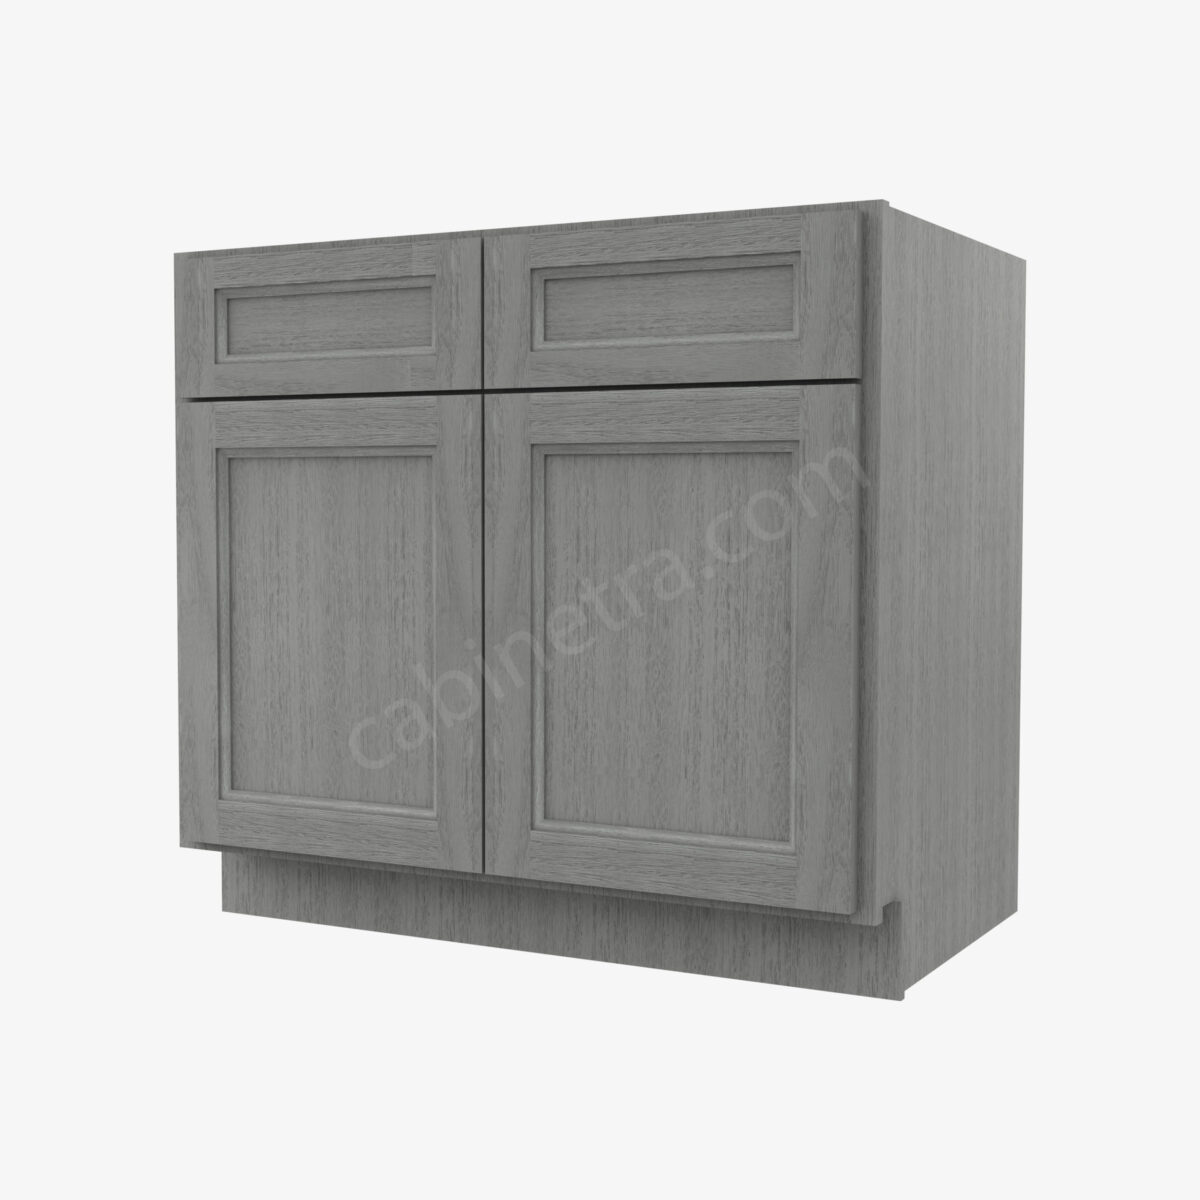 TG B36B 0 Forevermark Midtown Grey Cabinetra scaled